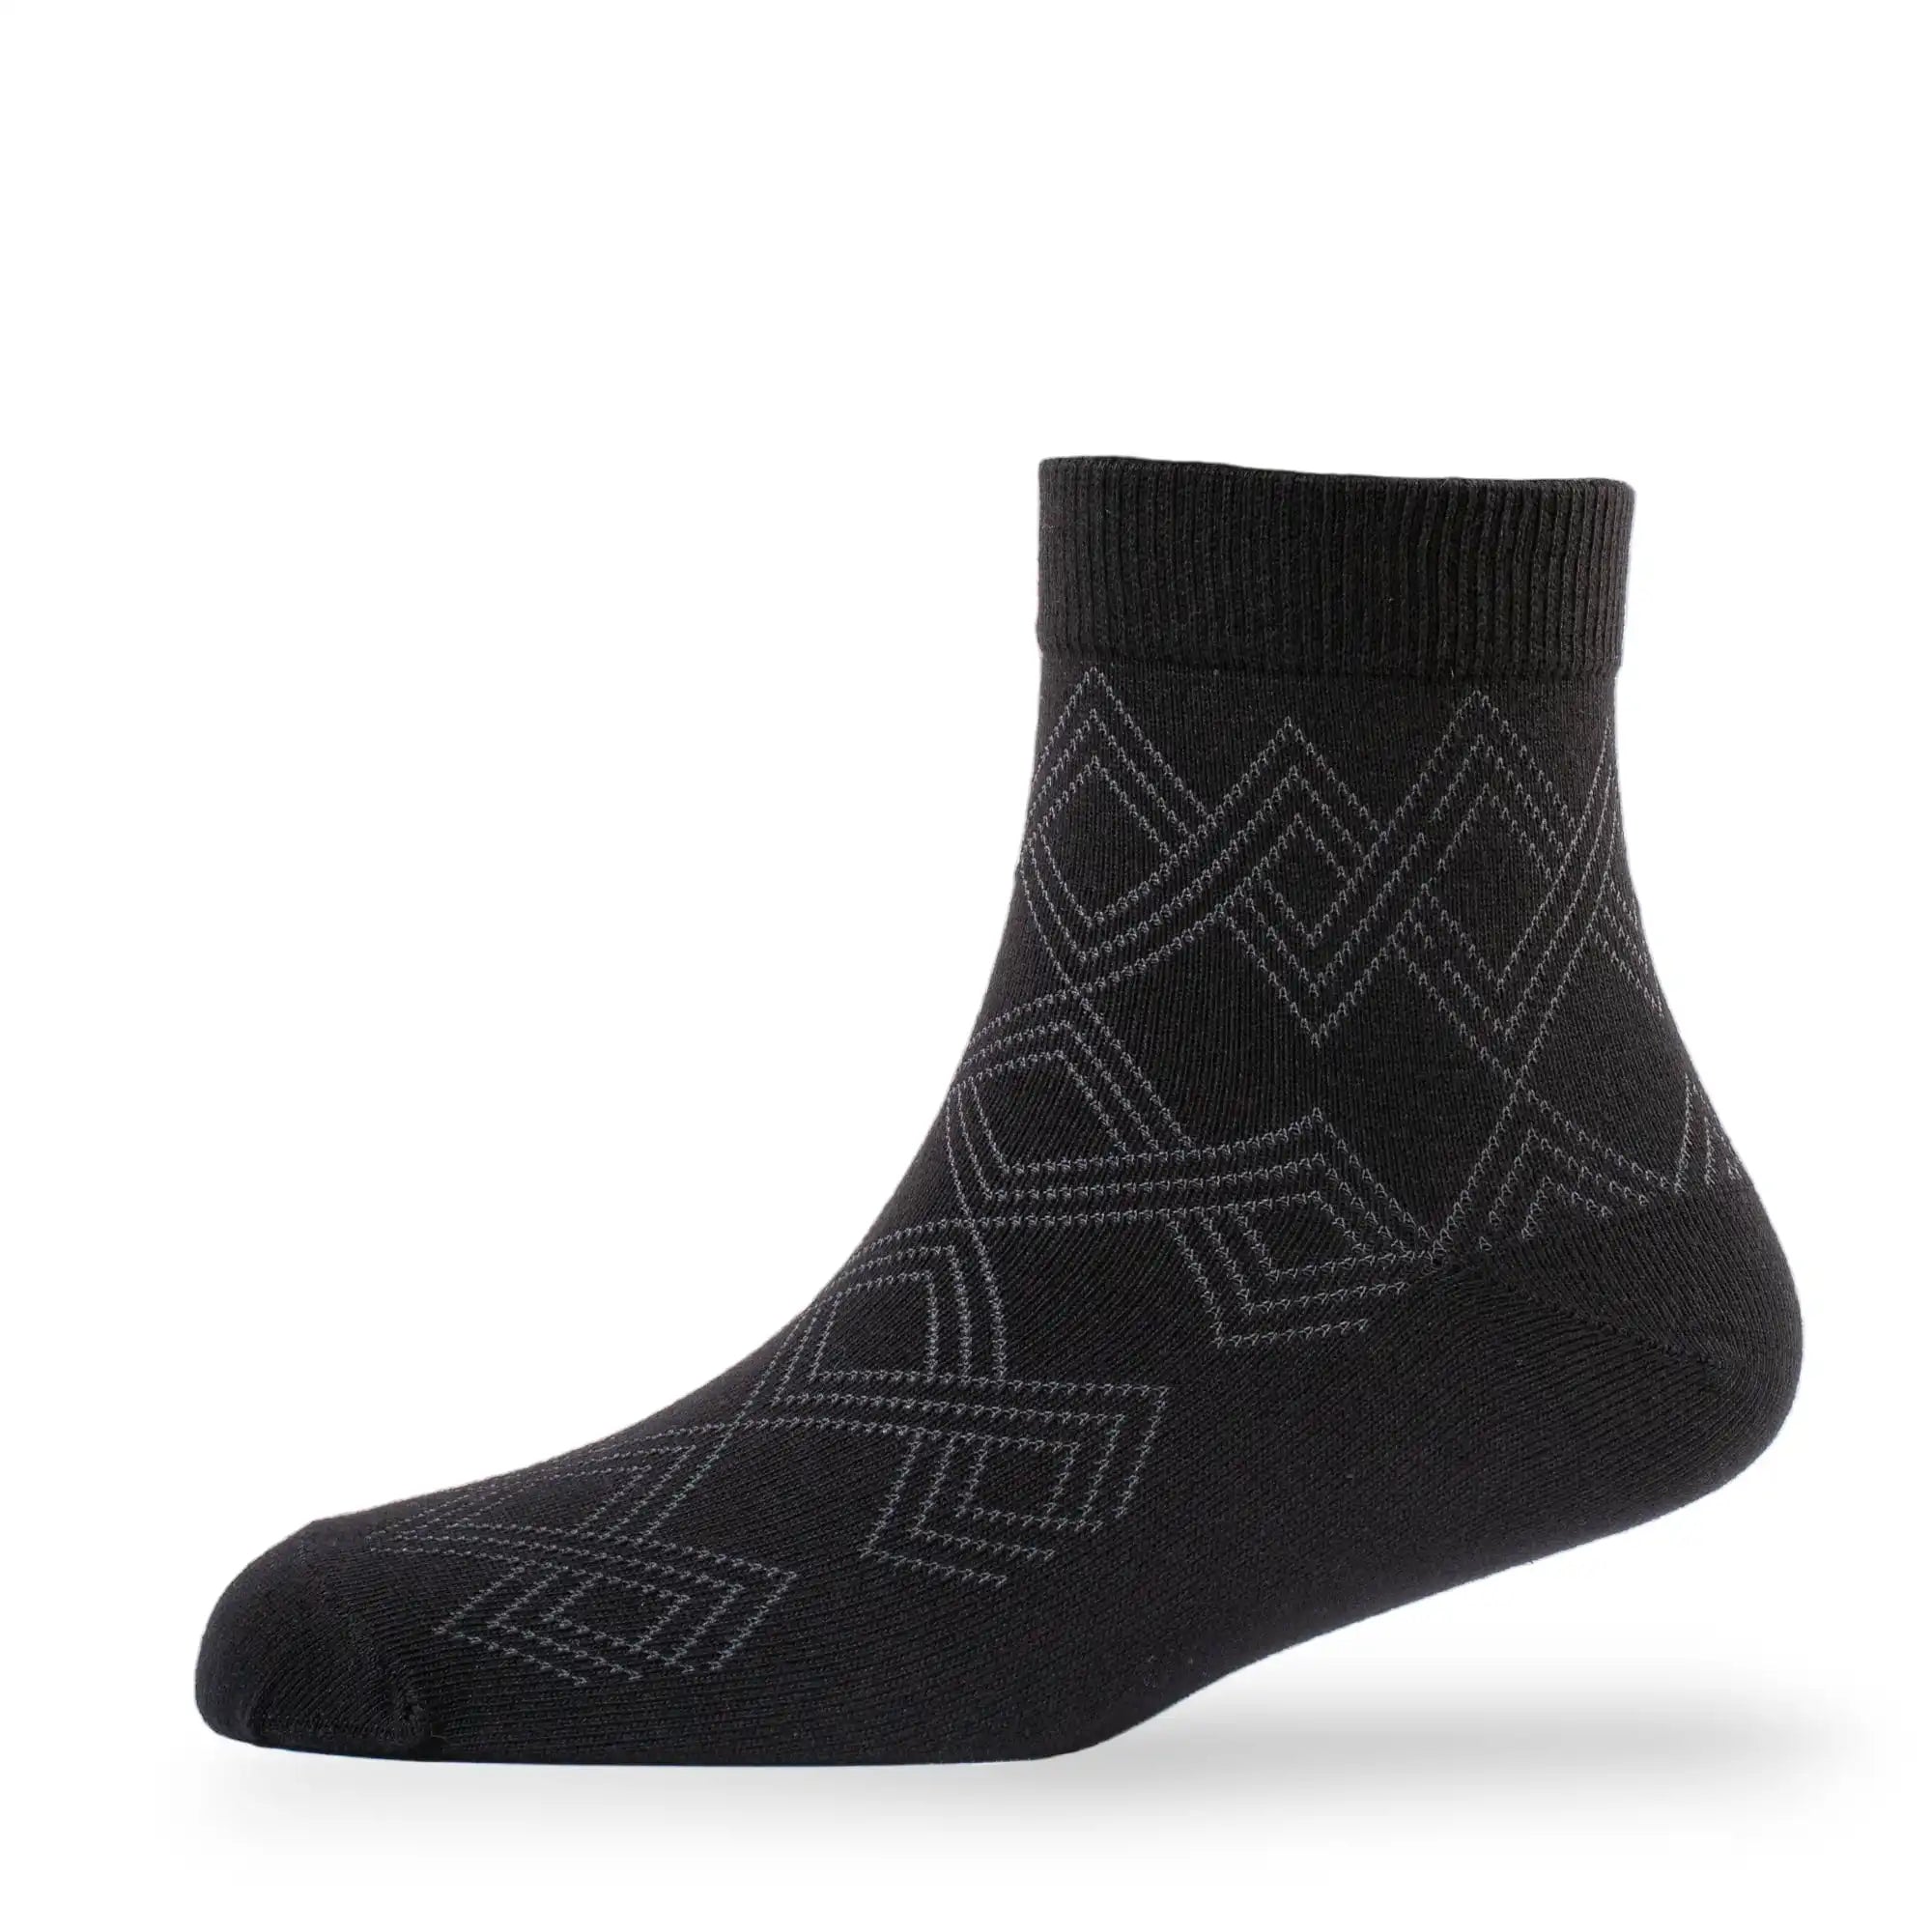 Young Wings Men's Black Colour Cotton Fabric Solid Ankle Length Socks - Pack of 5, Style no. 2304-M1